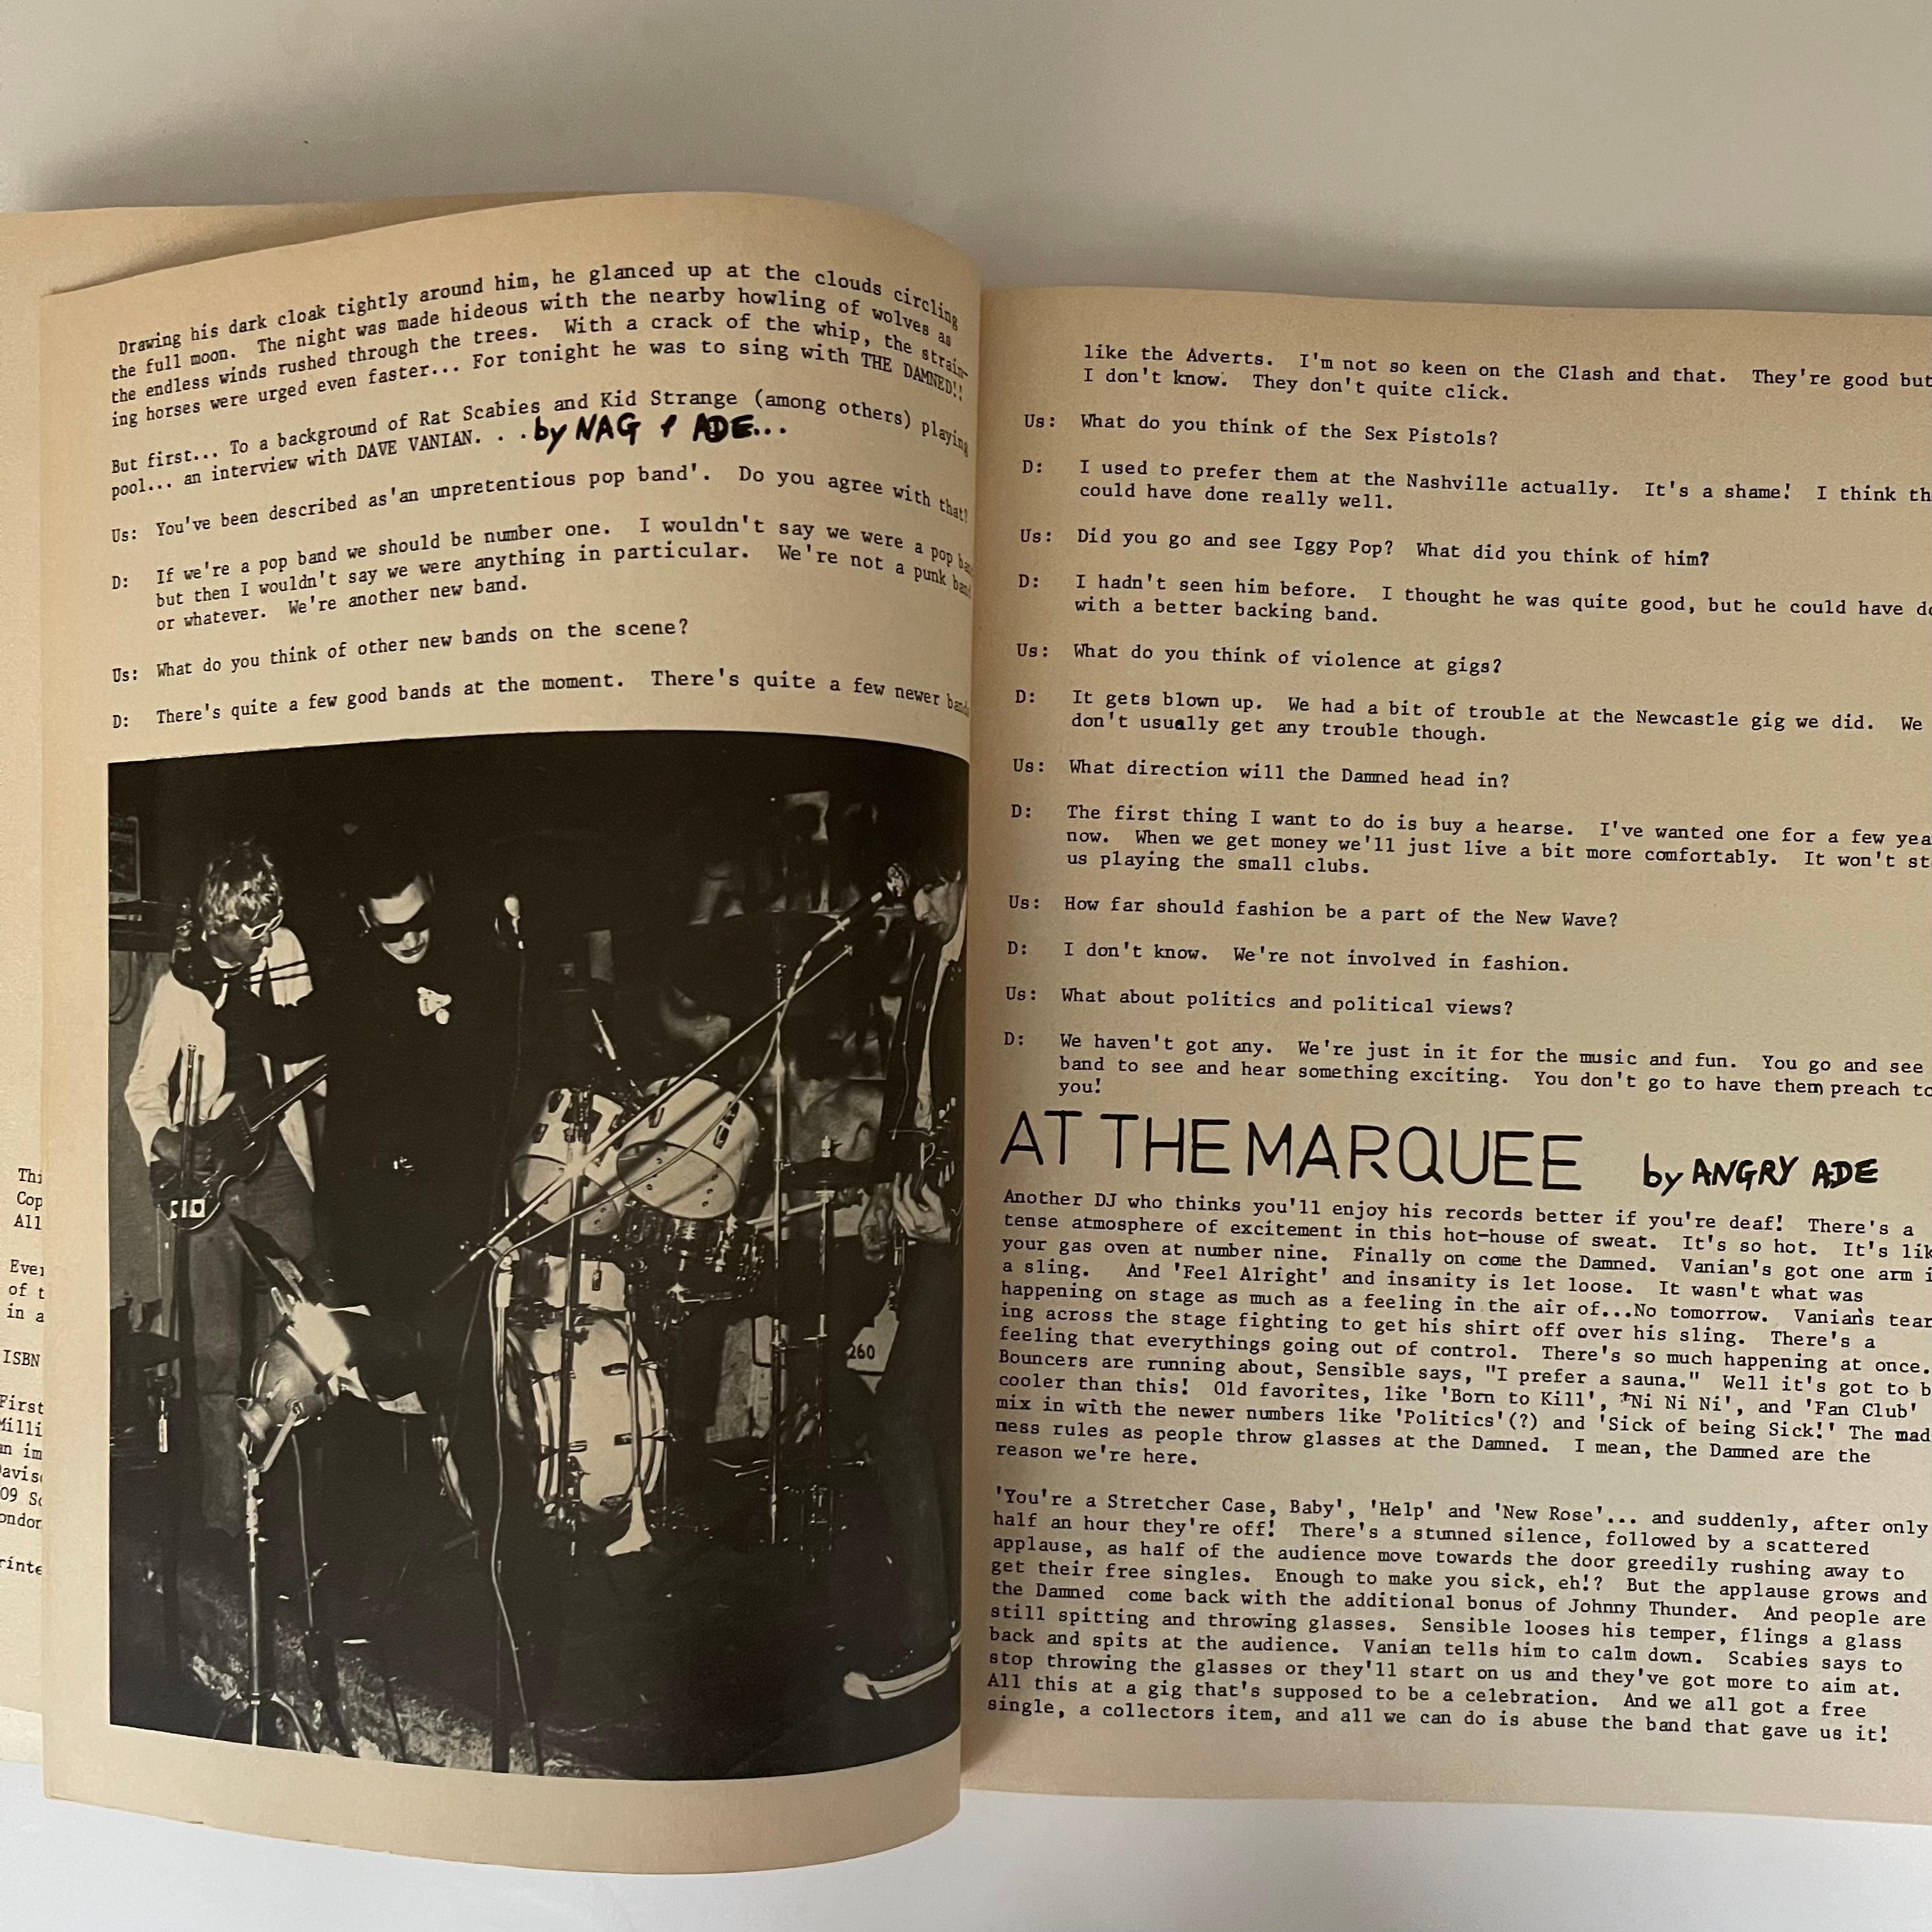 Julie Davis Punk
Published by Millington / Davison Publishing, London 1977. First edition. Soft cover in printed duotone wrappers. 

More of a book sized fanzine, that resembles Sniffin’ Glue in terms of layout and design.  Edited by Julie Davis,